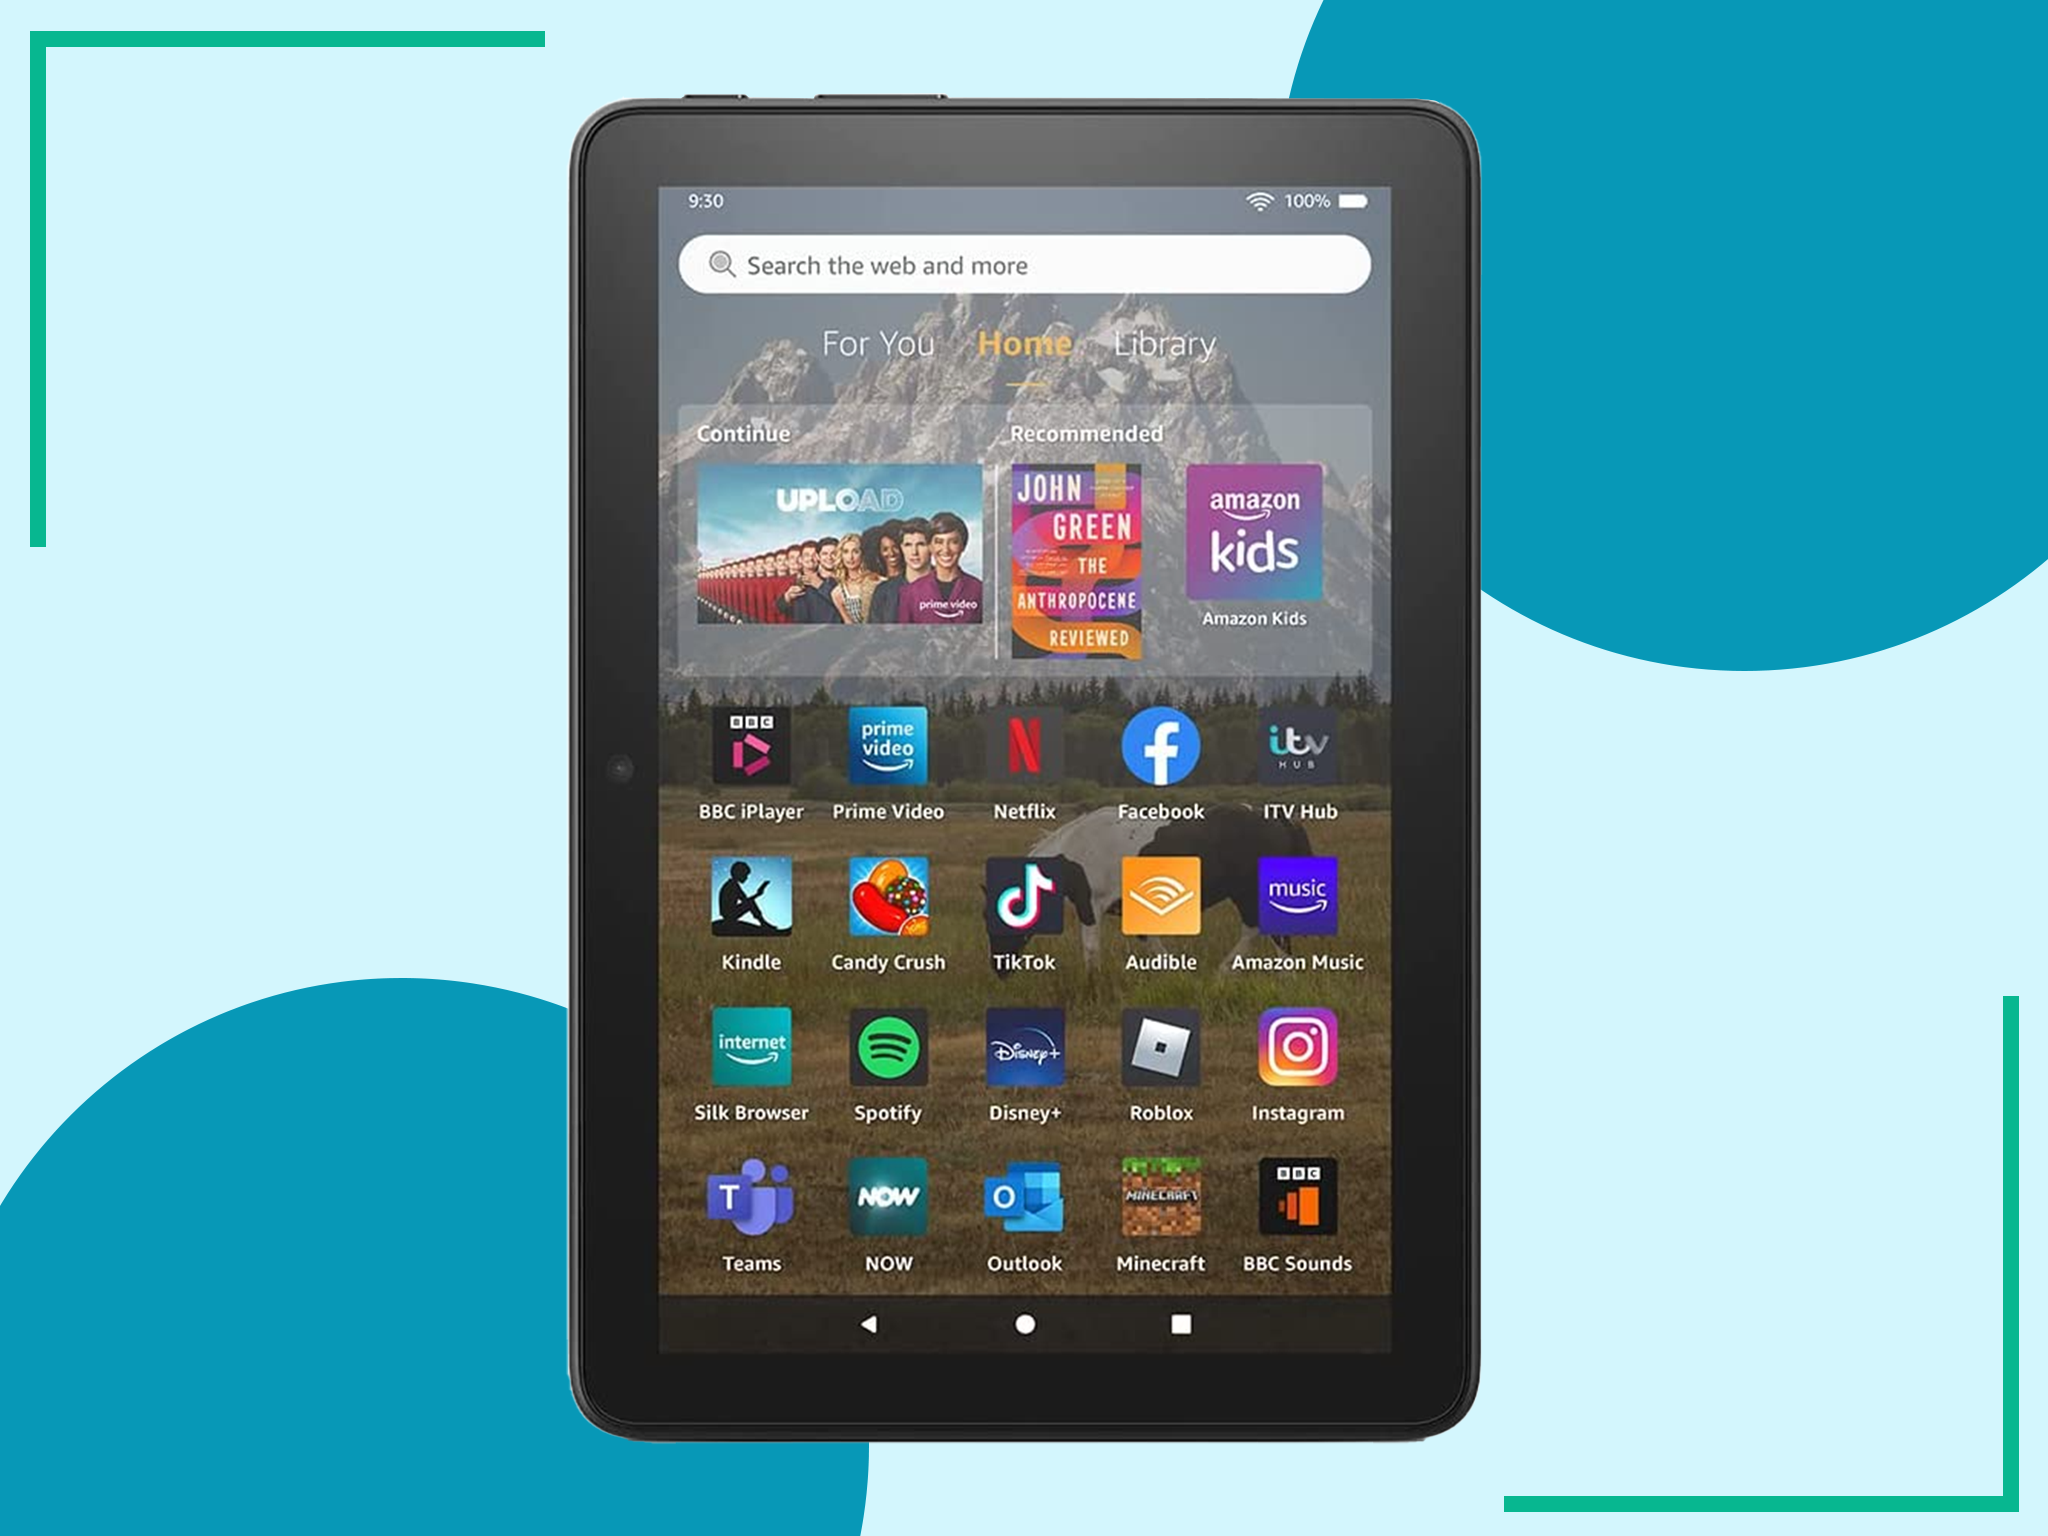 s Fire HD 8 tablet gets updated with hands-free Alexa